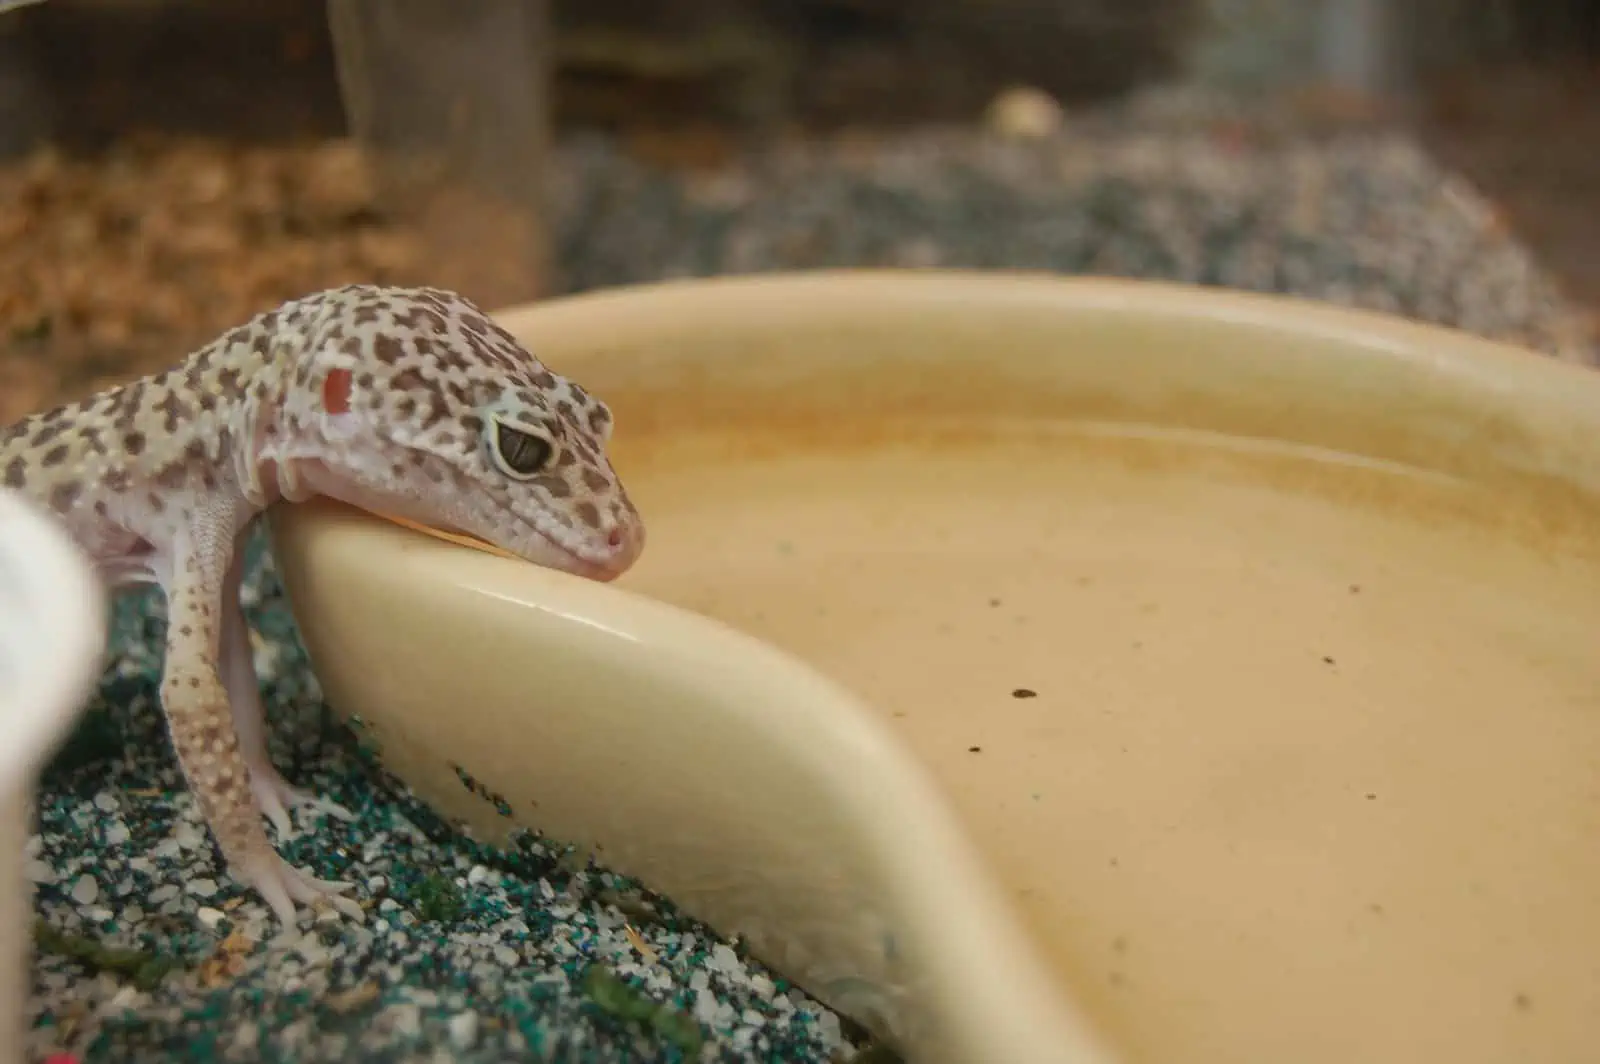 Leopard Gecko drinking water from bowl